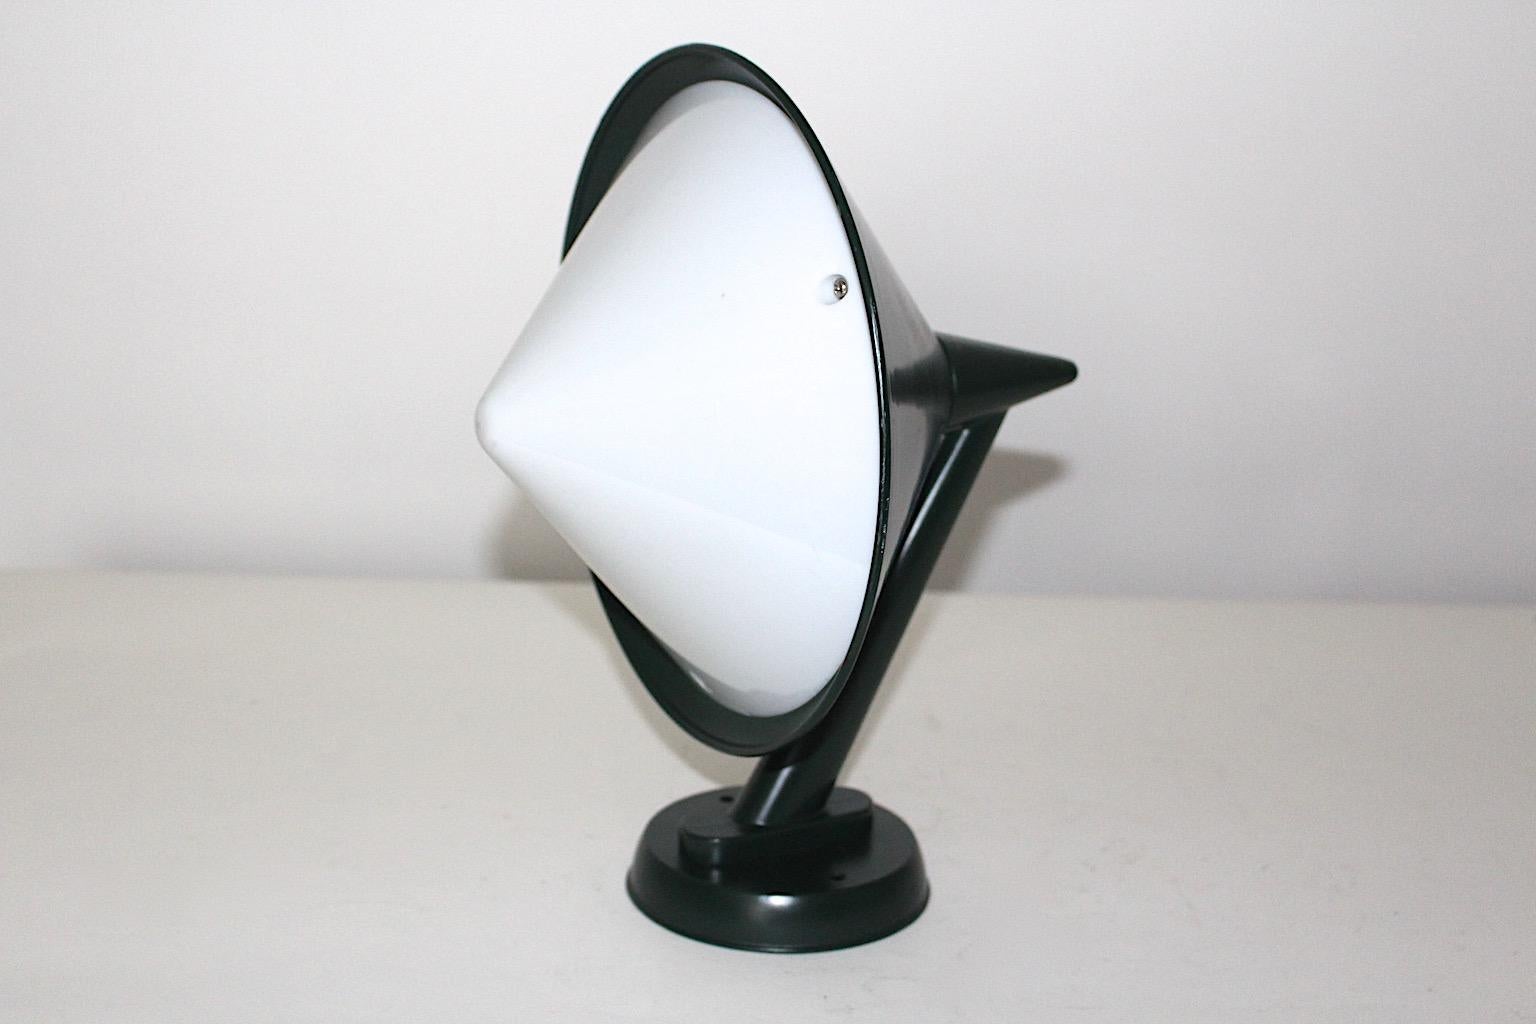 Mid Century Modern vintage sconce or wall light from metal in fir green color tone and white acrylic shade by Svea Winkler 1960s for Orno, Finland.
Wonderful design combination with geometric forms perfect for indoor and outdoor.
Svea Winkler (